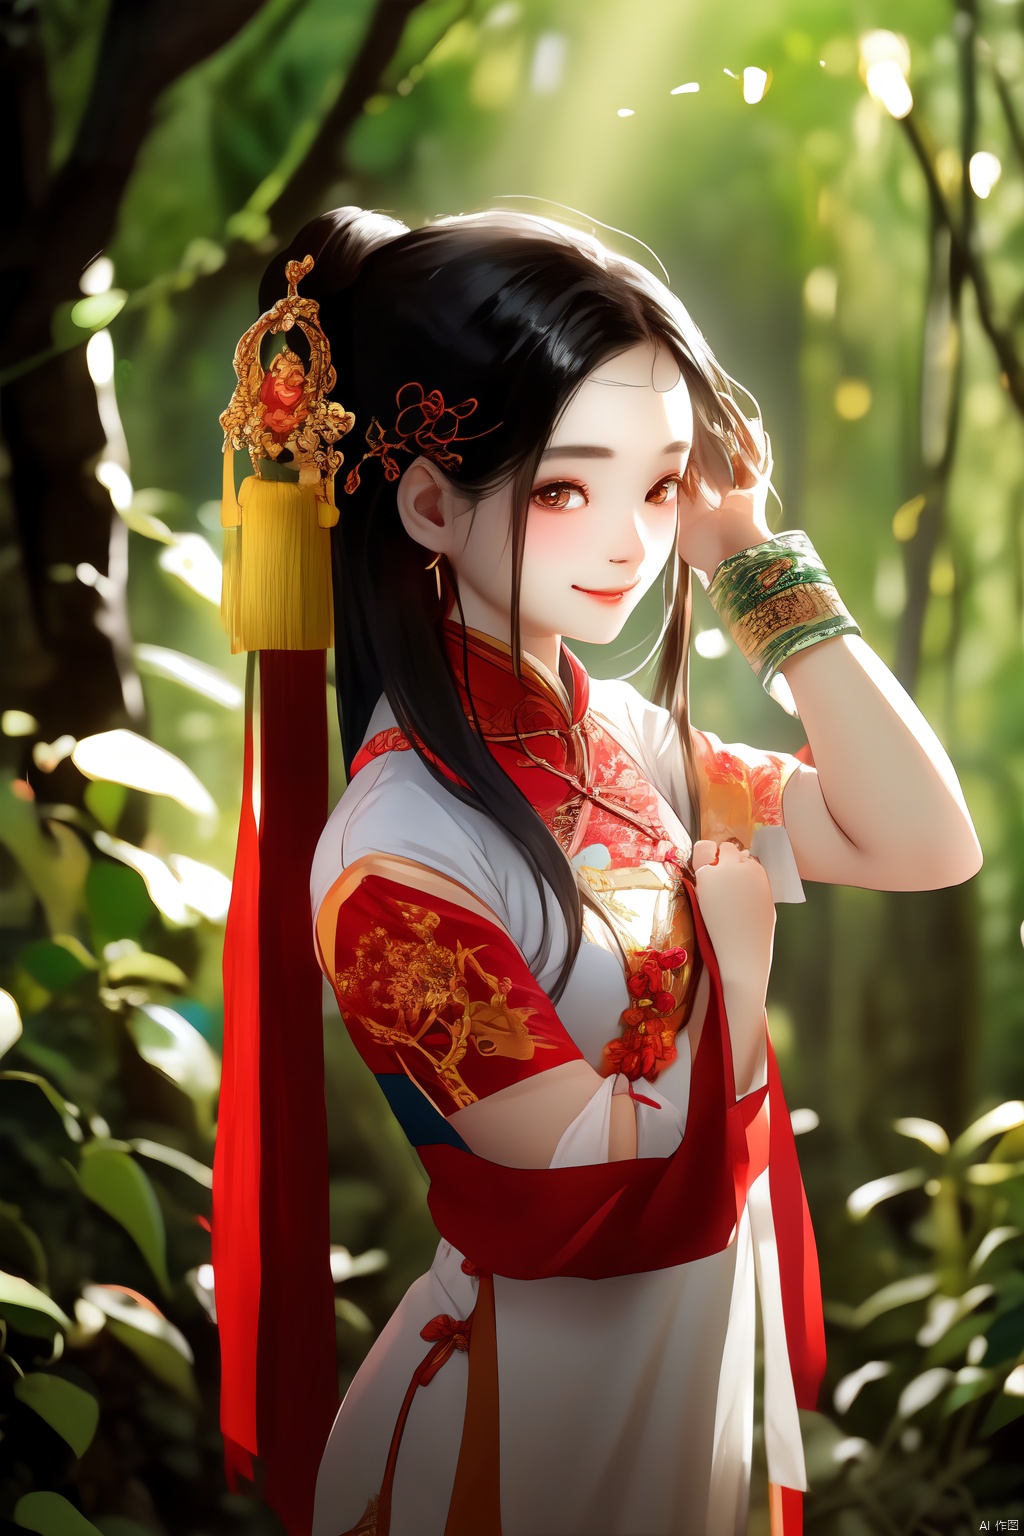 A Chinese girl was walking on a path in the woods, with light shining on her face and a smile imprinted on her face. The girl was facing me and turned her head to look at me with a loving gaze. She was wearing ancient clothes and was stroking her hair with her hands